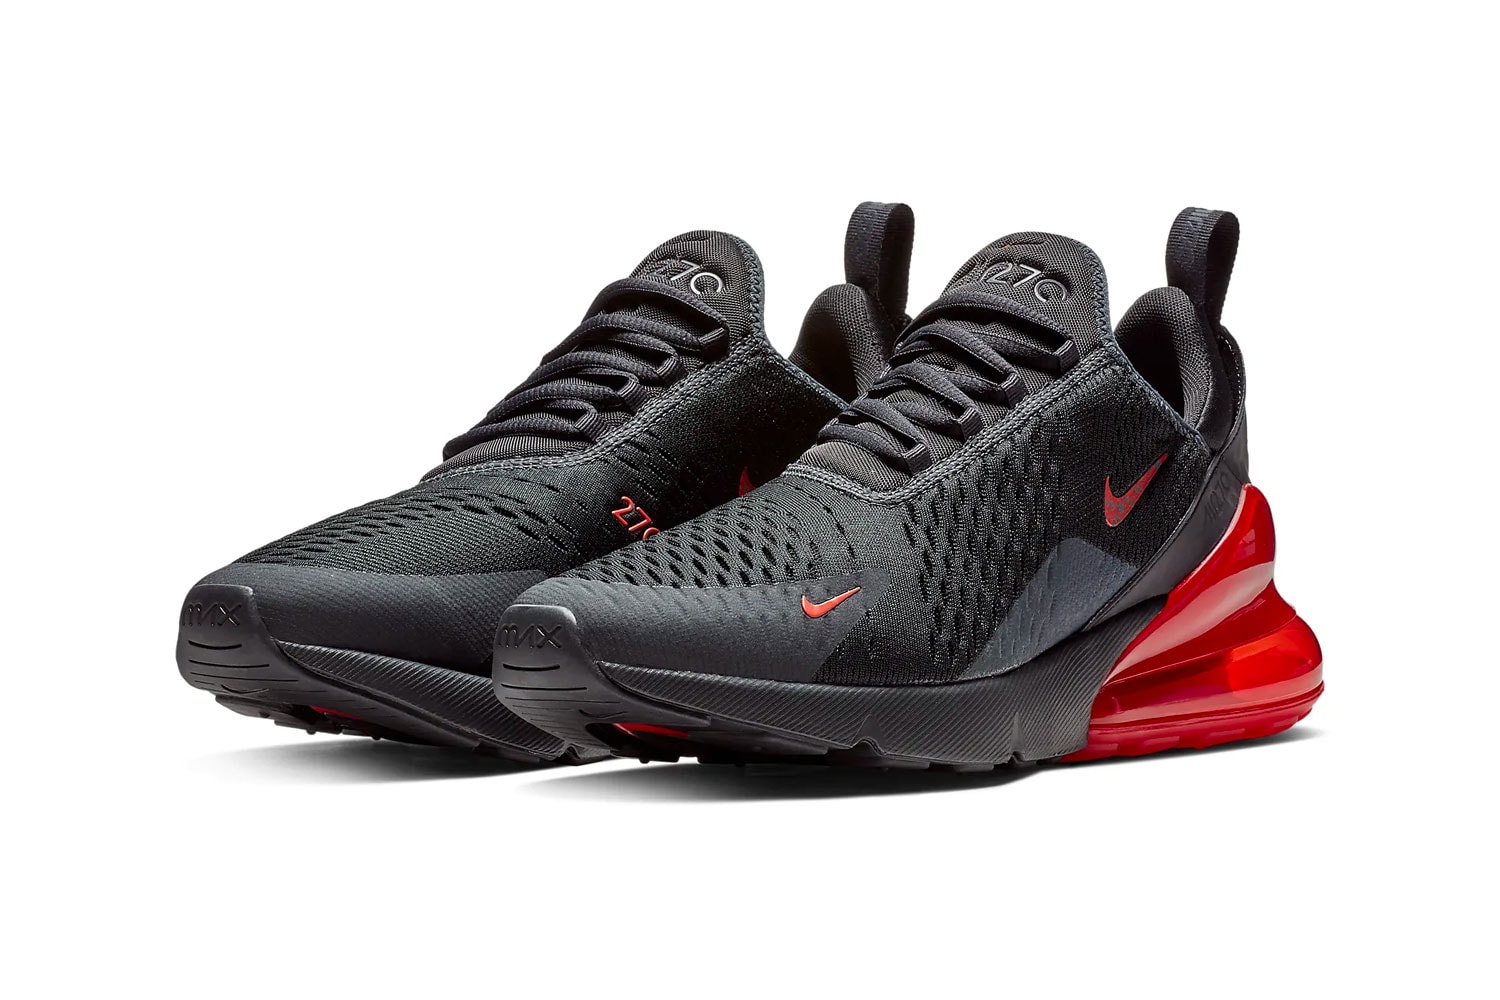 Nike Air Max 270 Reflective Black/Red | Hypebeast